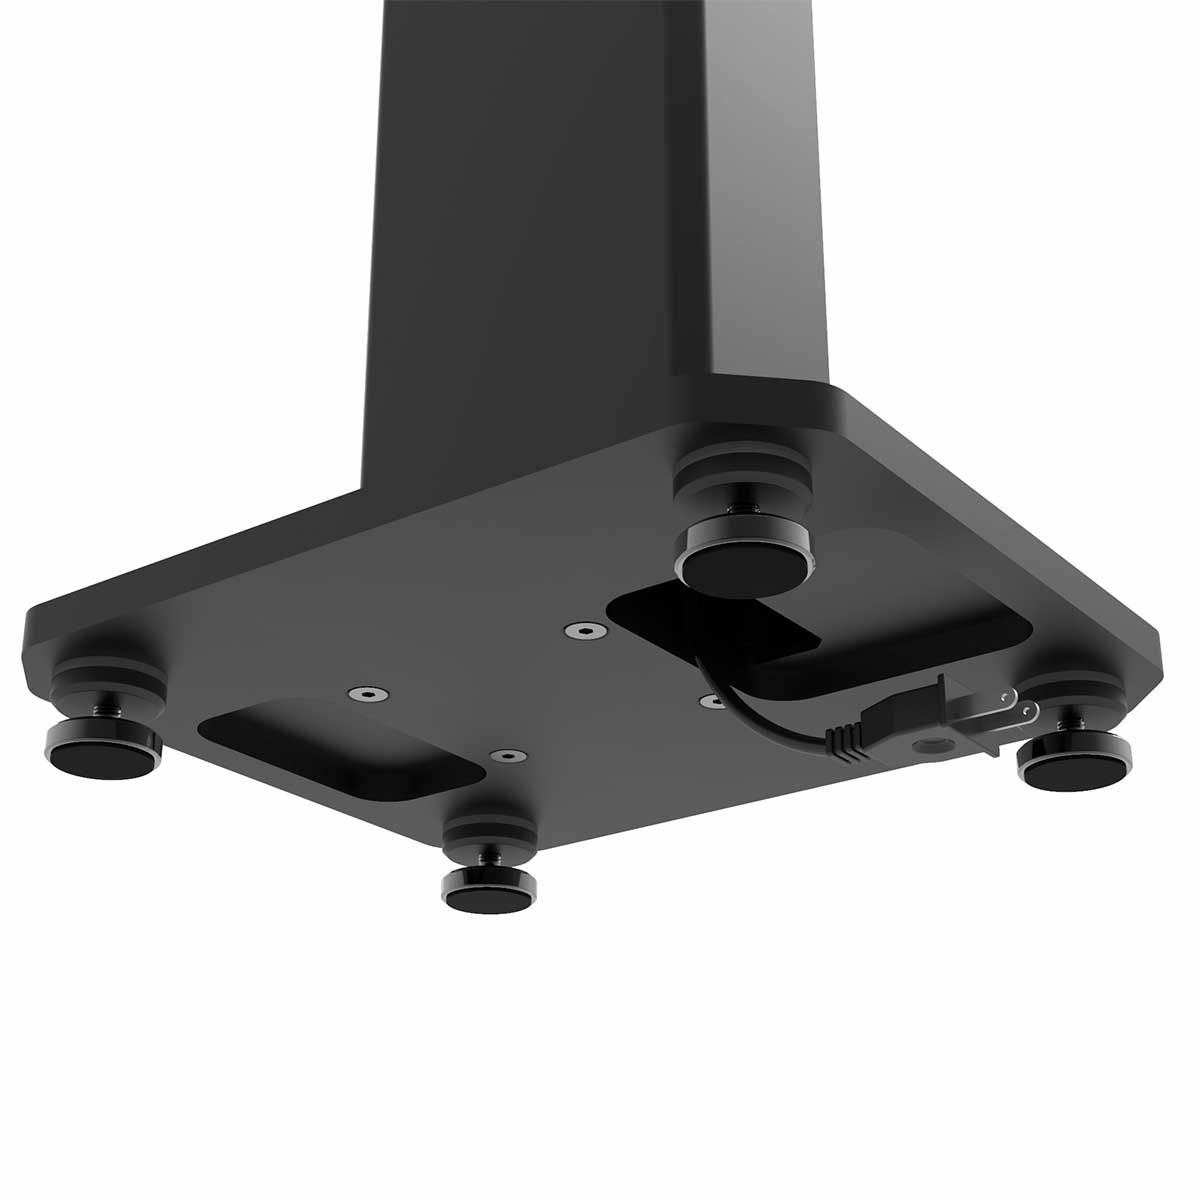 Kanto SX Speaker Stands, Black, bottom view with cable management outlet and isolation feet